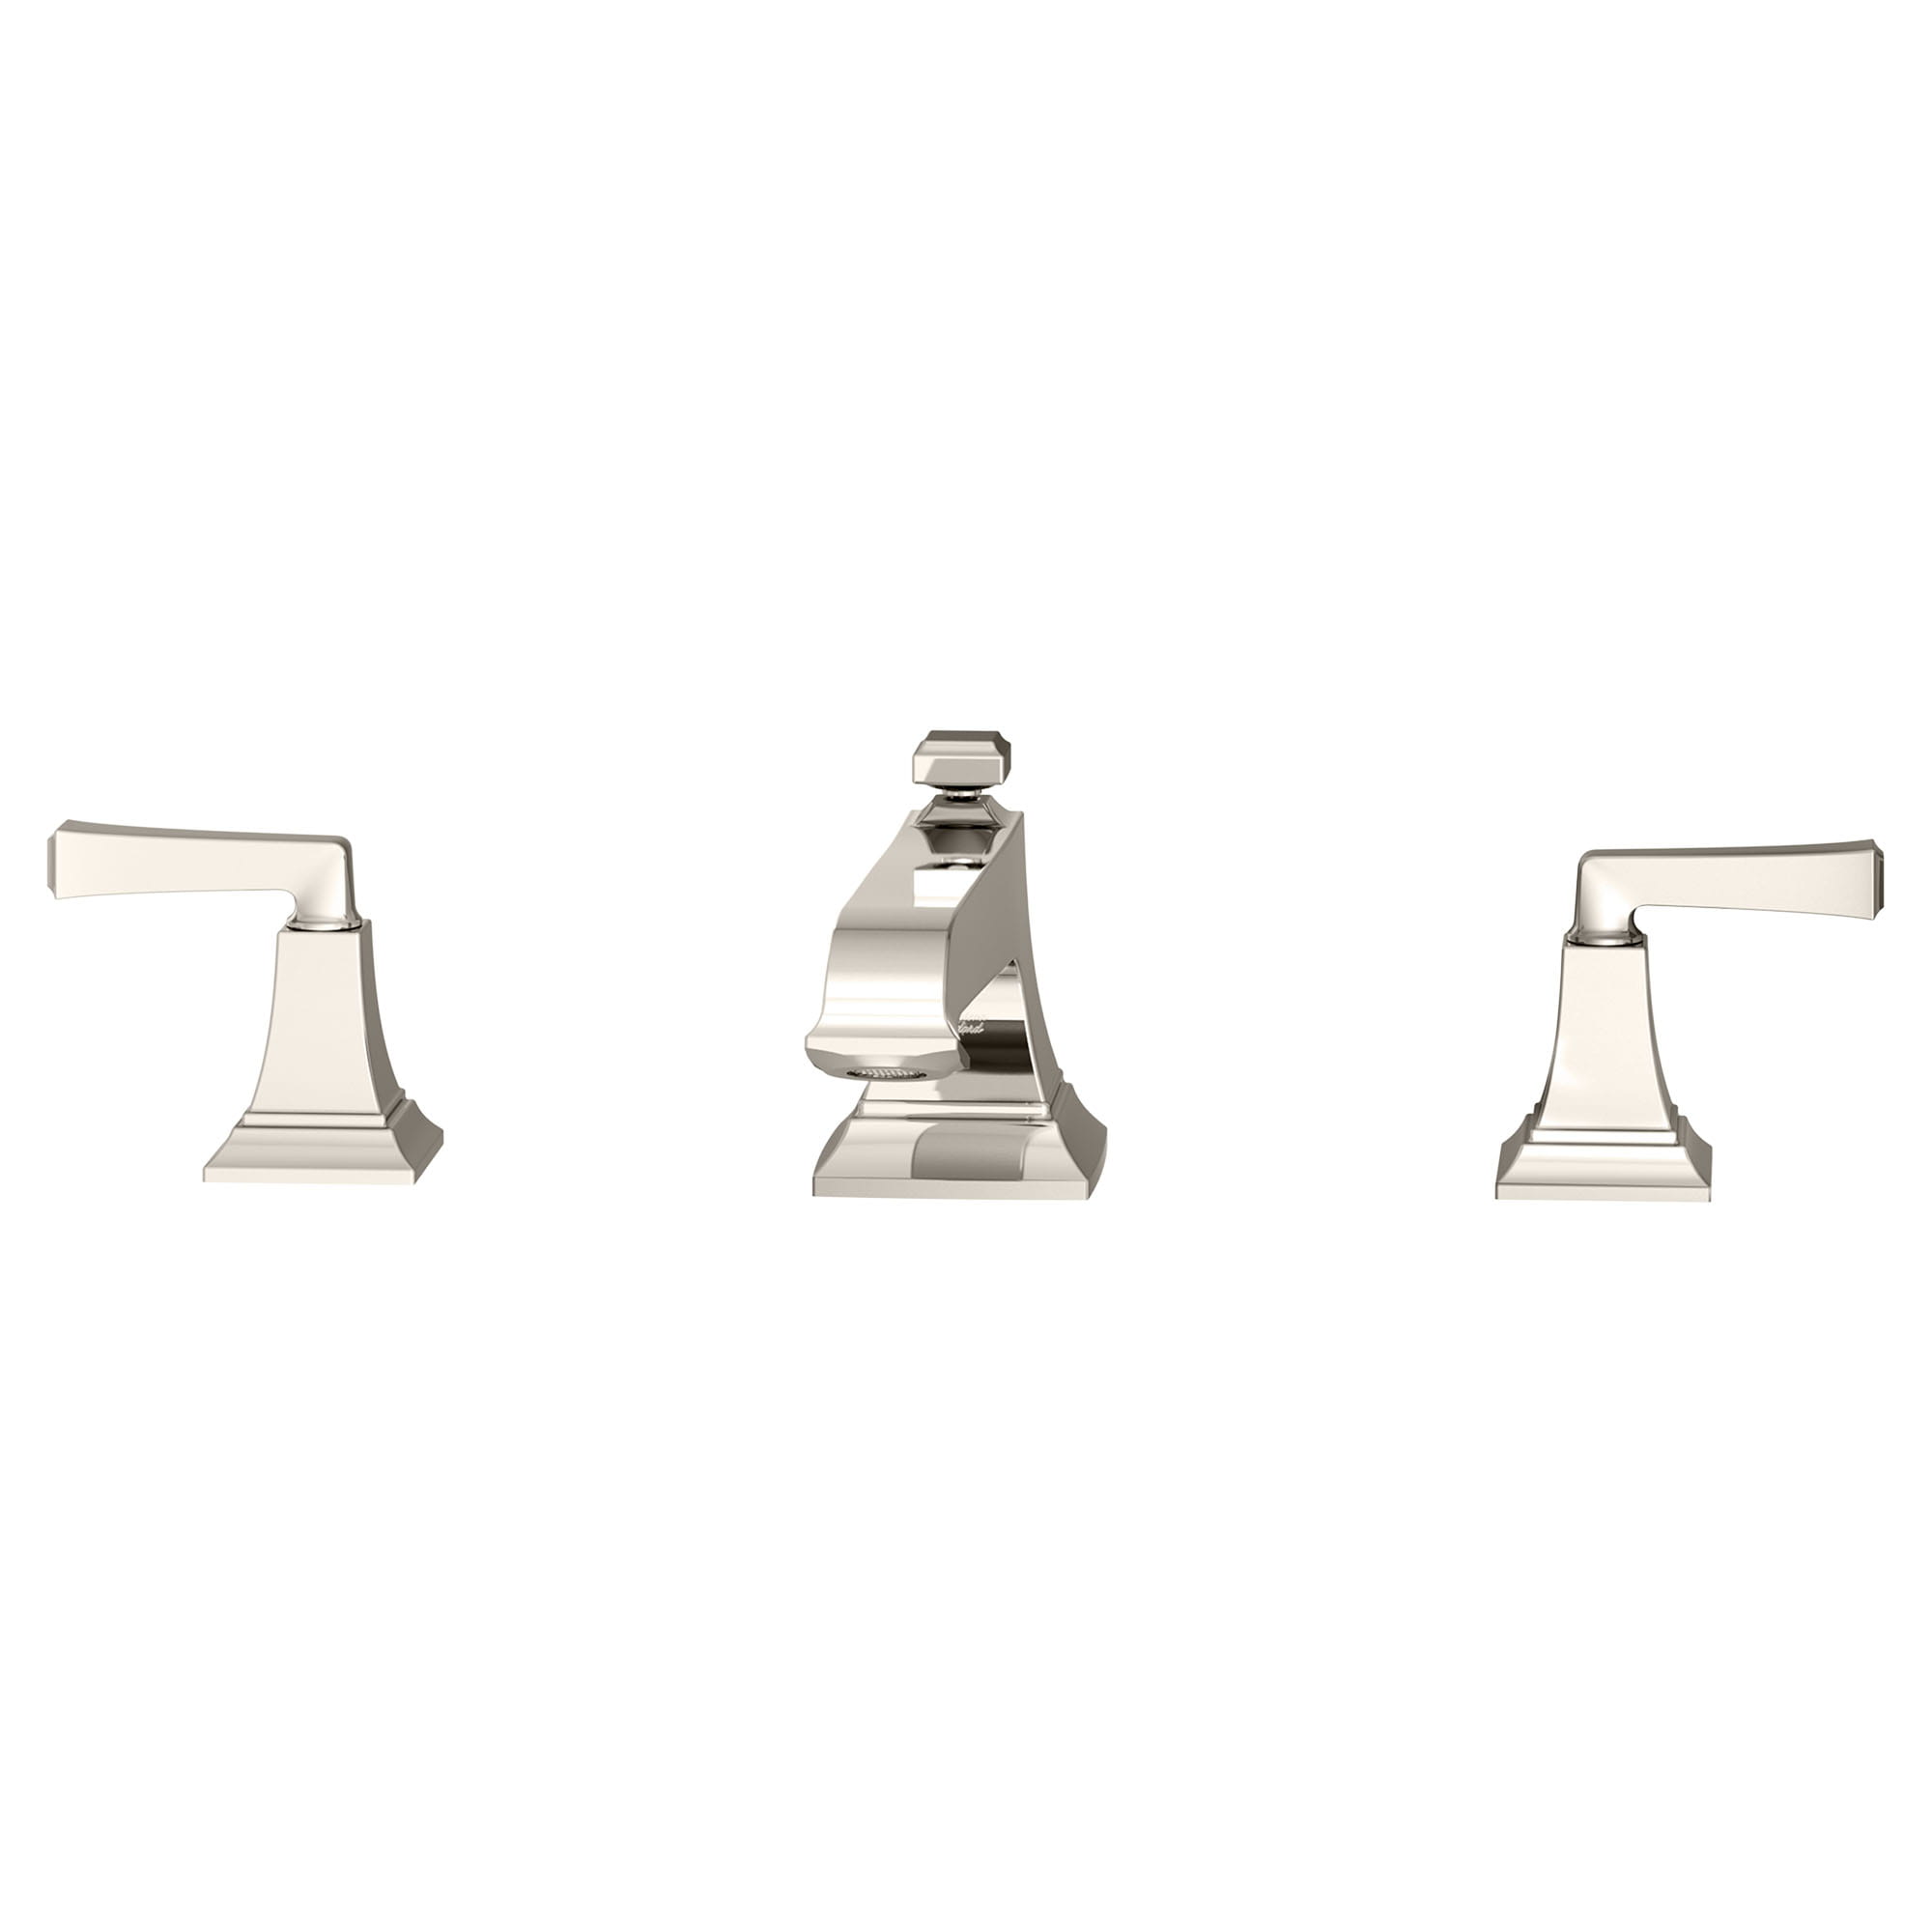 Town Square S Bathub Faucet With Lever Handles for Flash Rough In Valve POLISHED  NICKEL